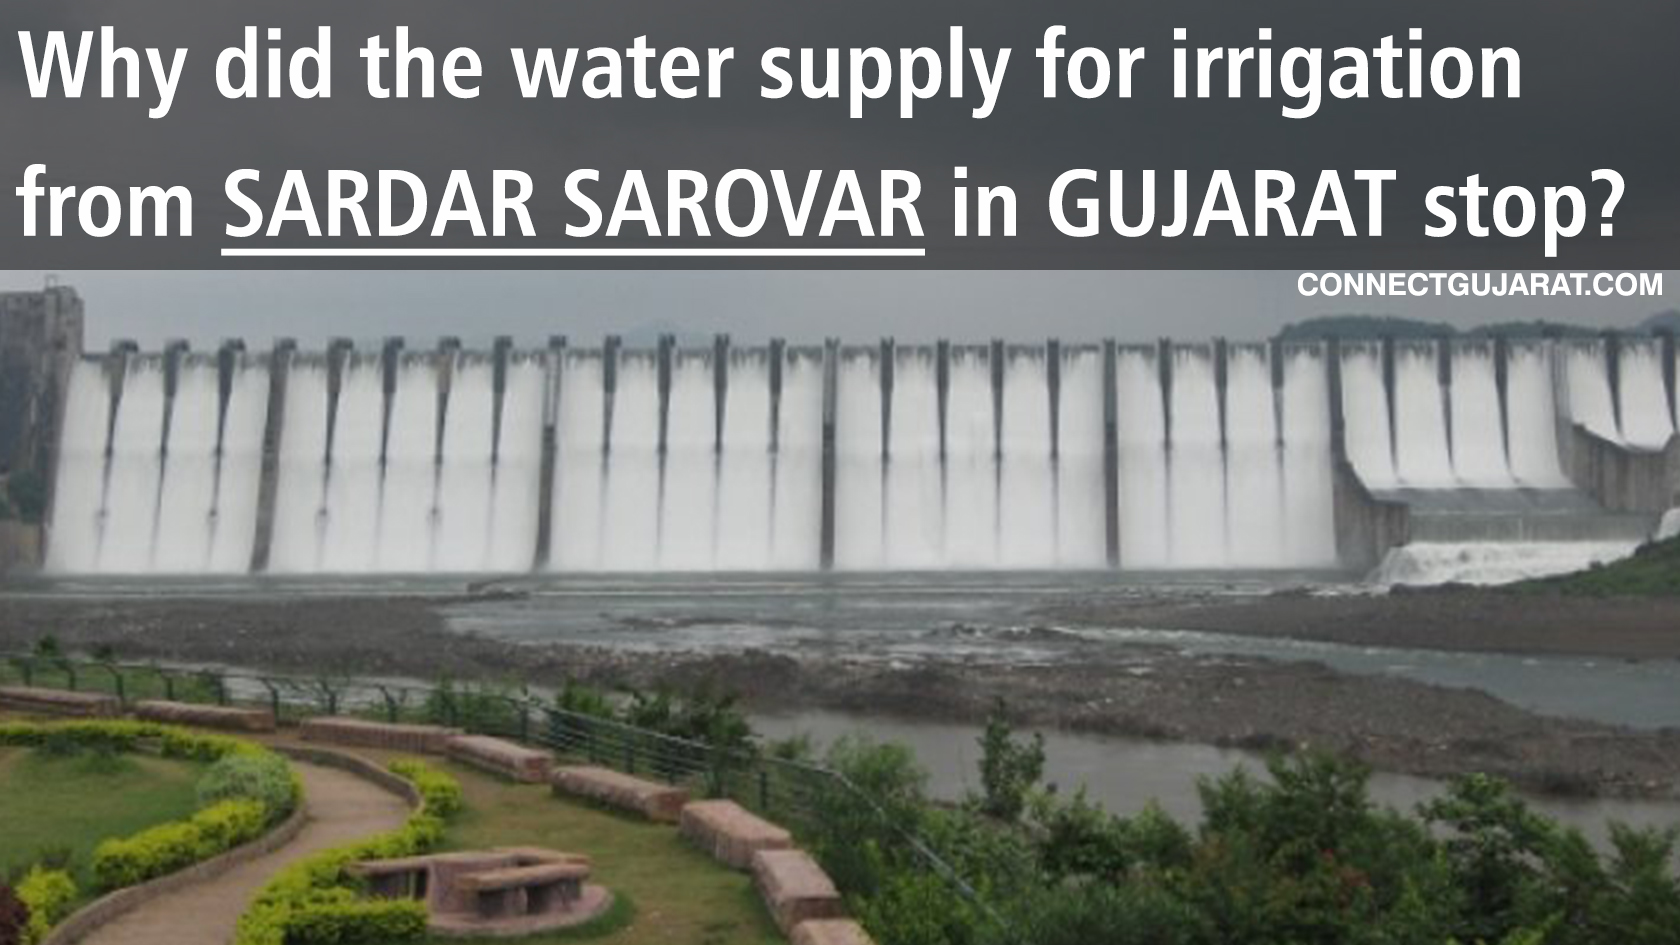 Why did the water supply for irrigation from Sardar Sarovar in Gujarat stop?